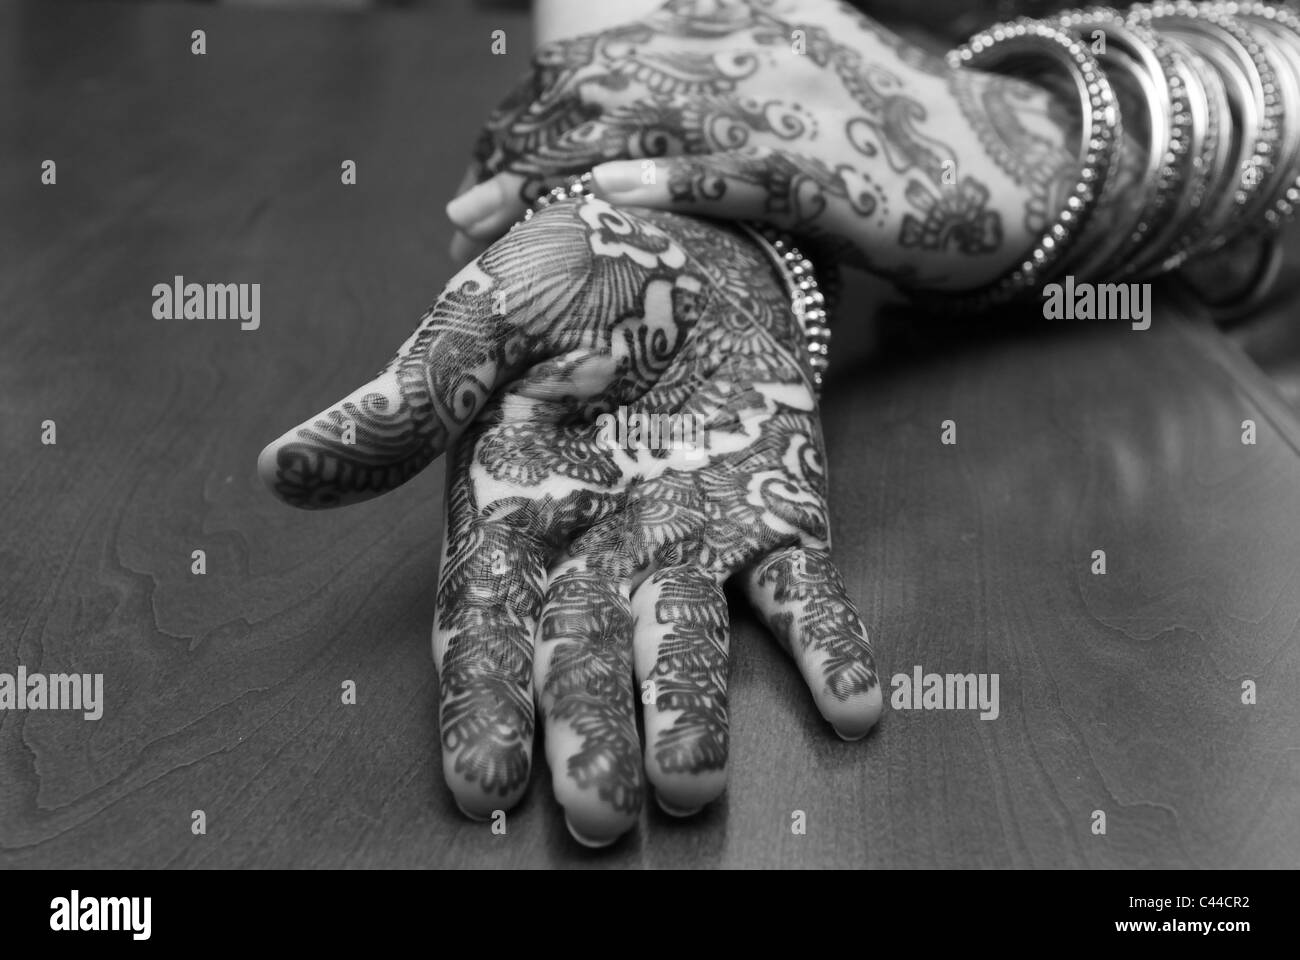 Black/white photo of the hands, showing the contrast of the design on the hand. The Art of Henna Stock Photo